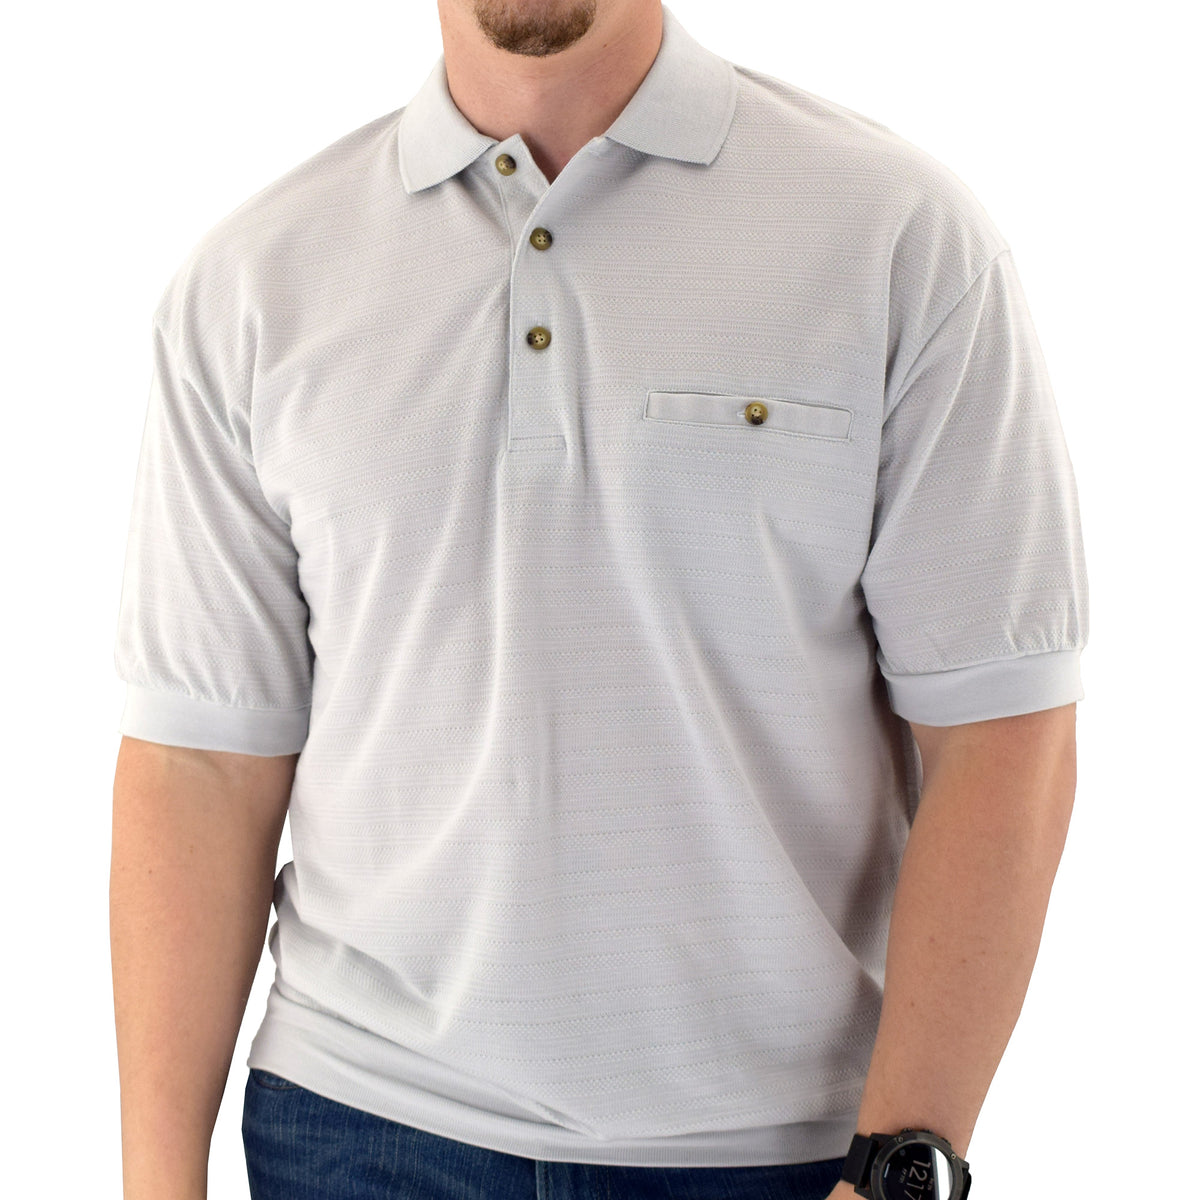 This Safe Harbor Solid Pique Banded Bottom Shirt is made of 60% Cotton ...